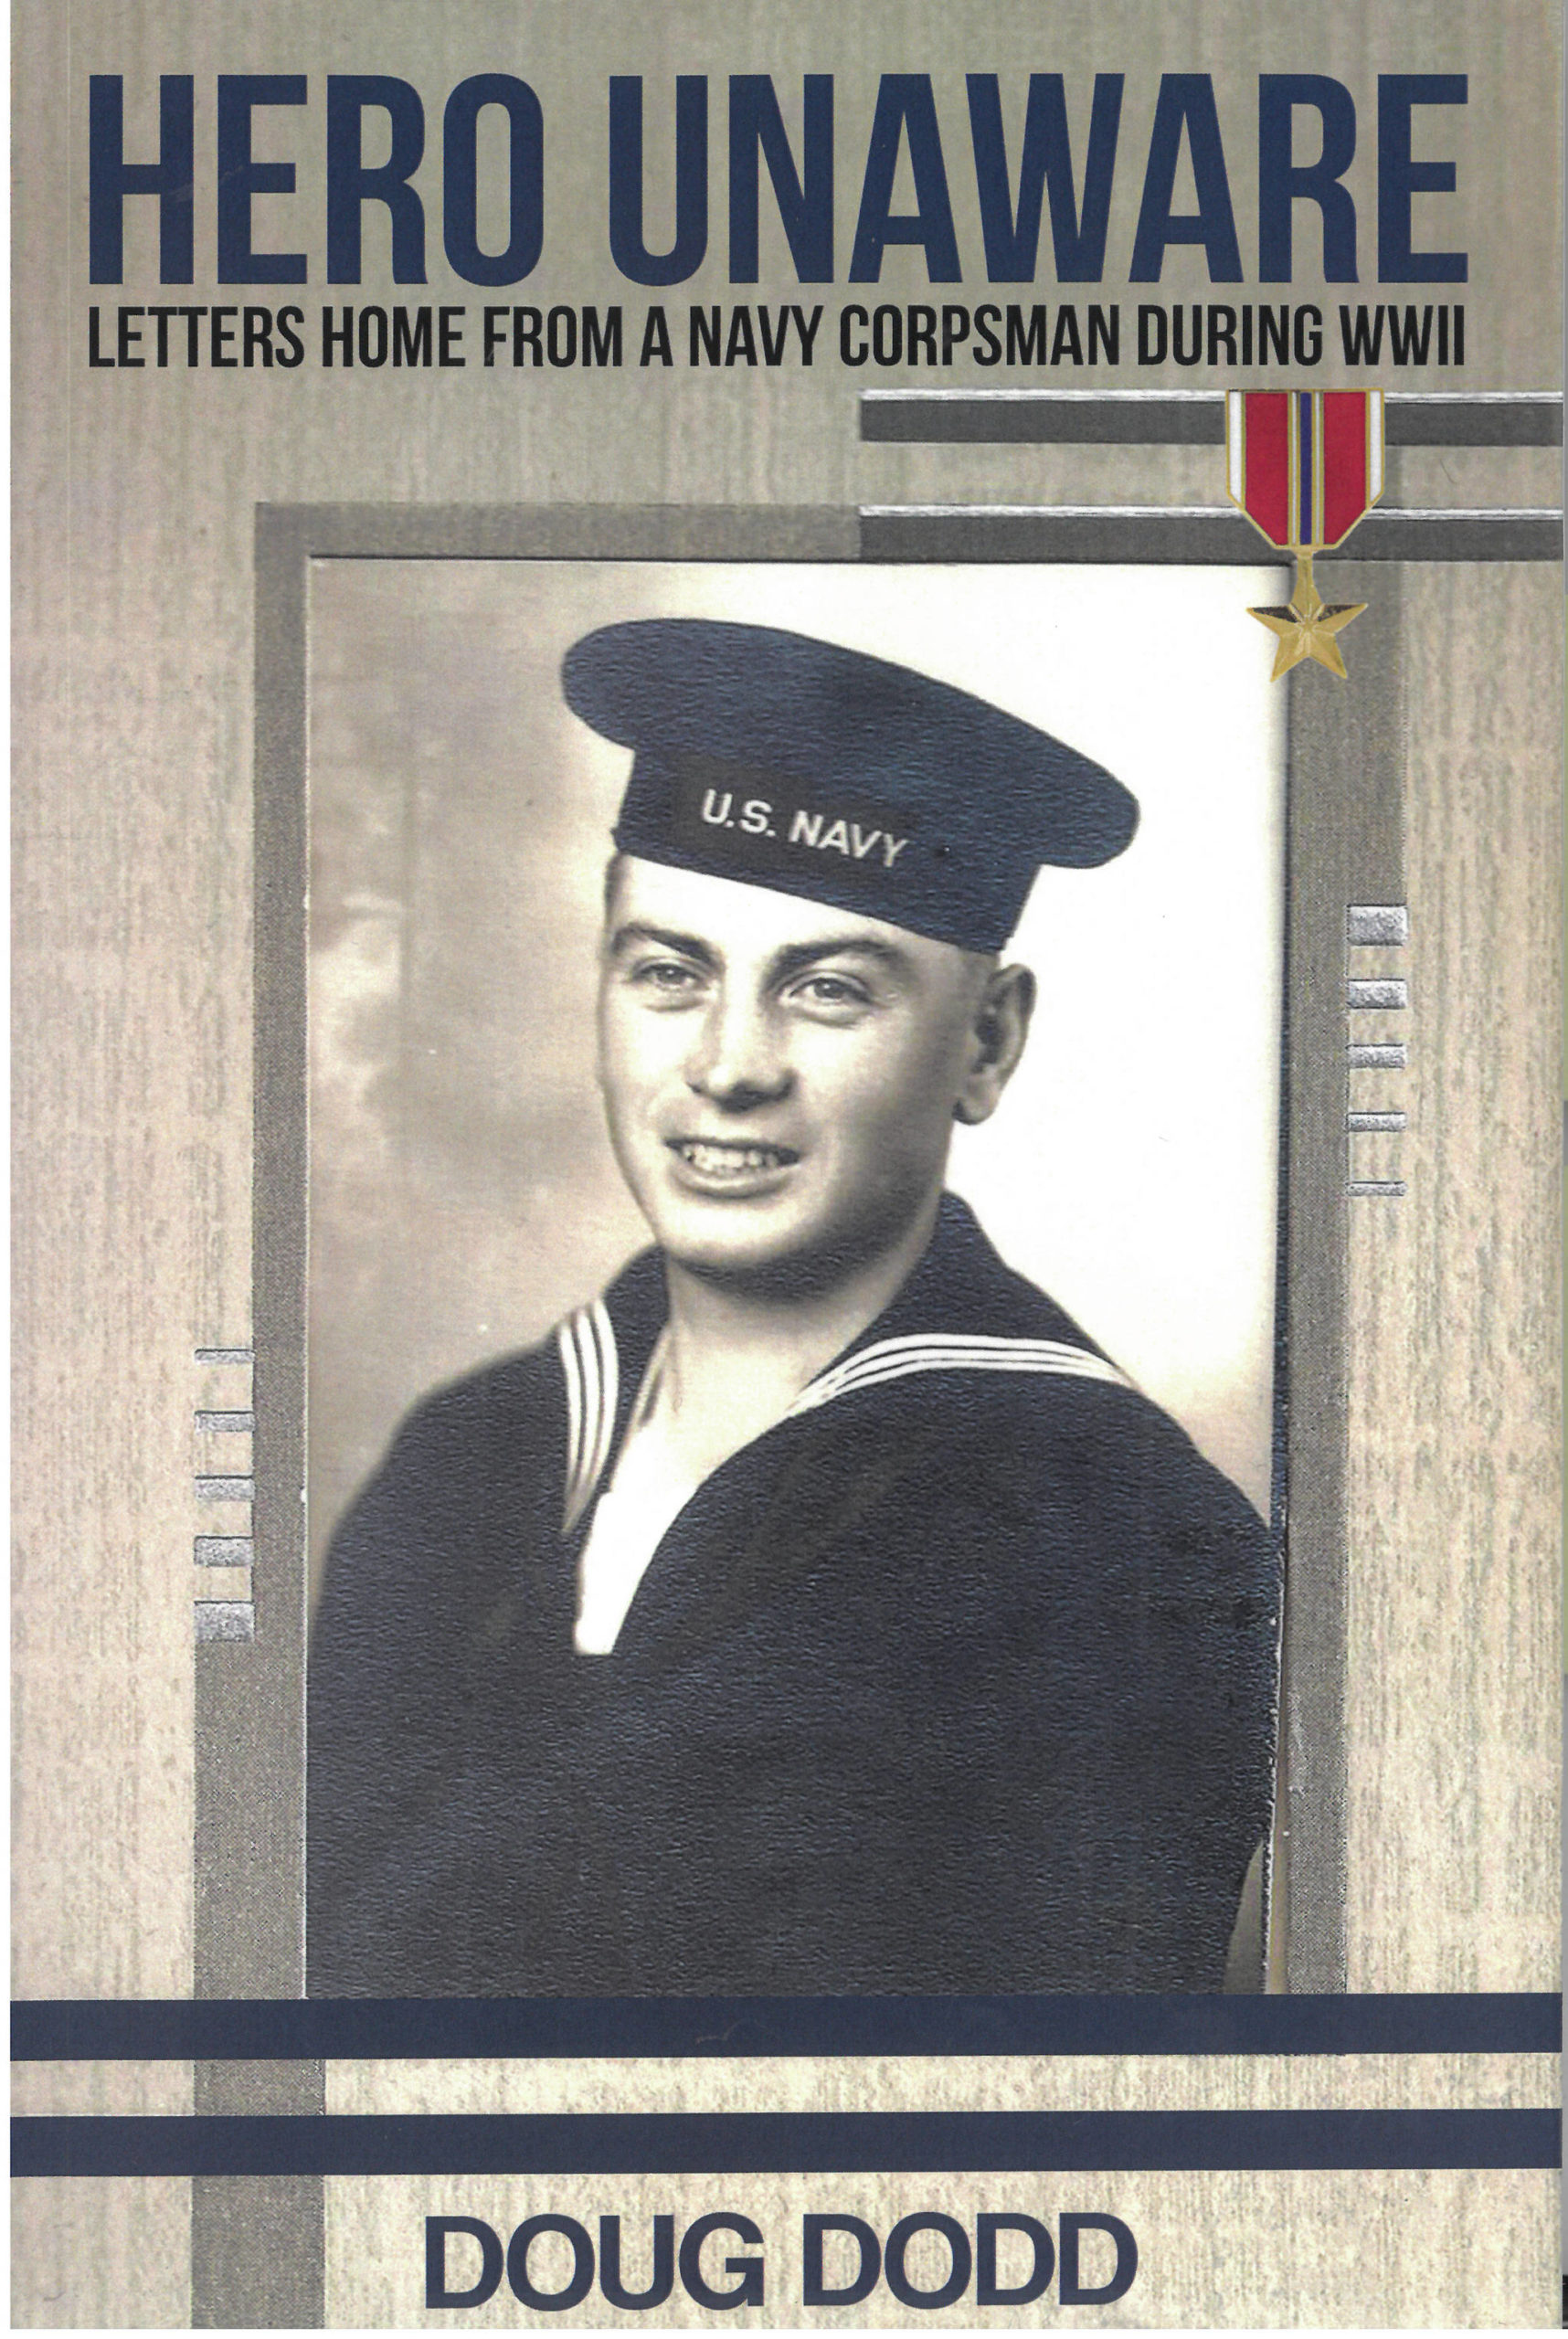 The cover of Doug Dodd’s “Hero Unaware” features a photo of Walter Dodd in his U.S. Navy uniform at the start of World War II.